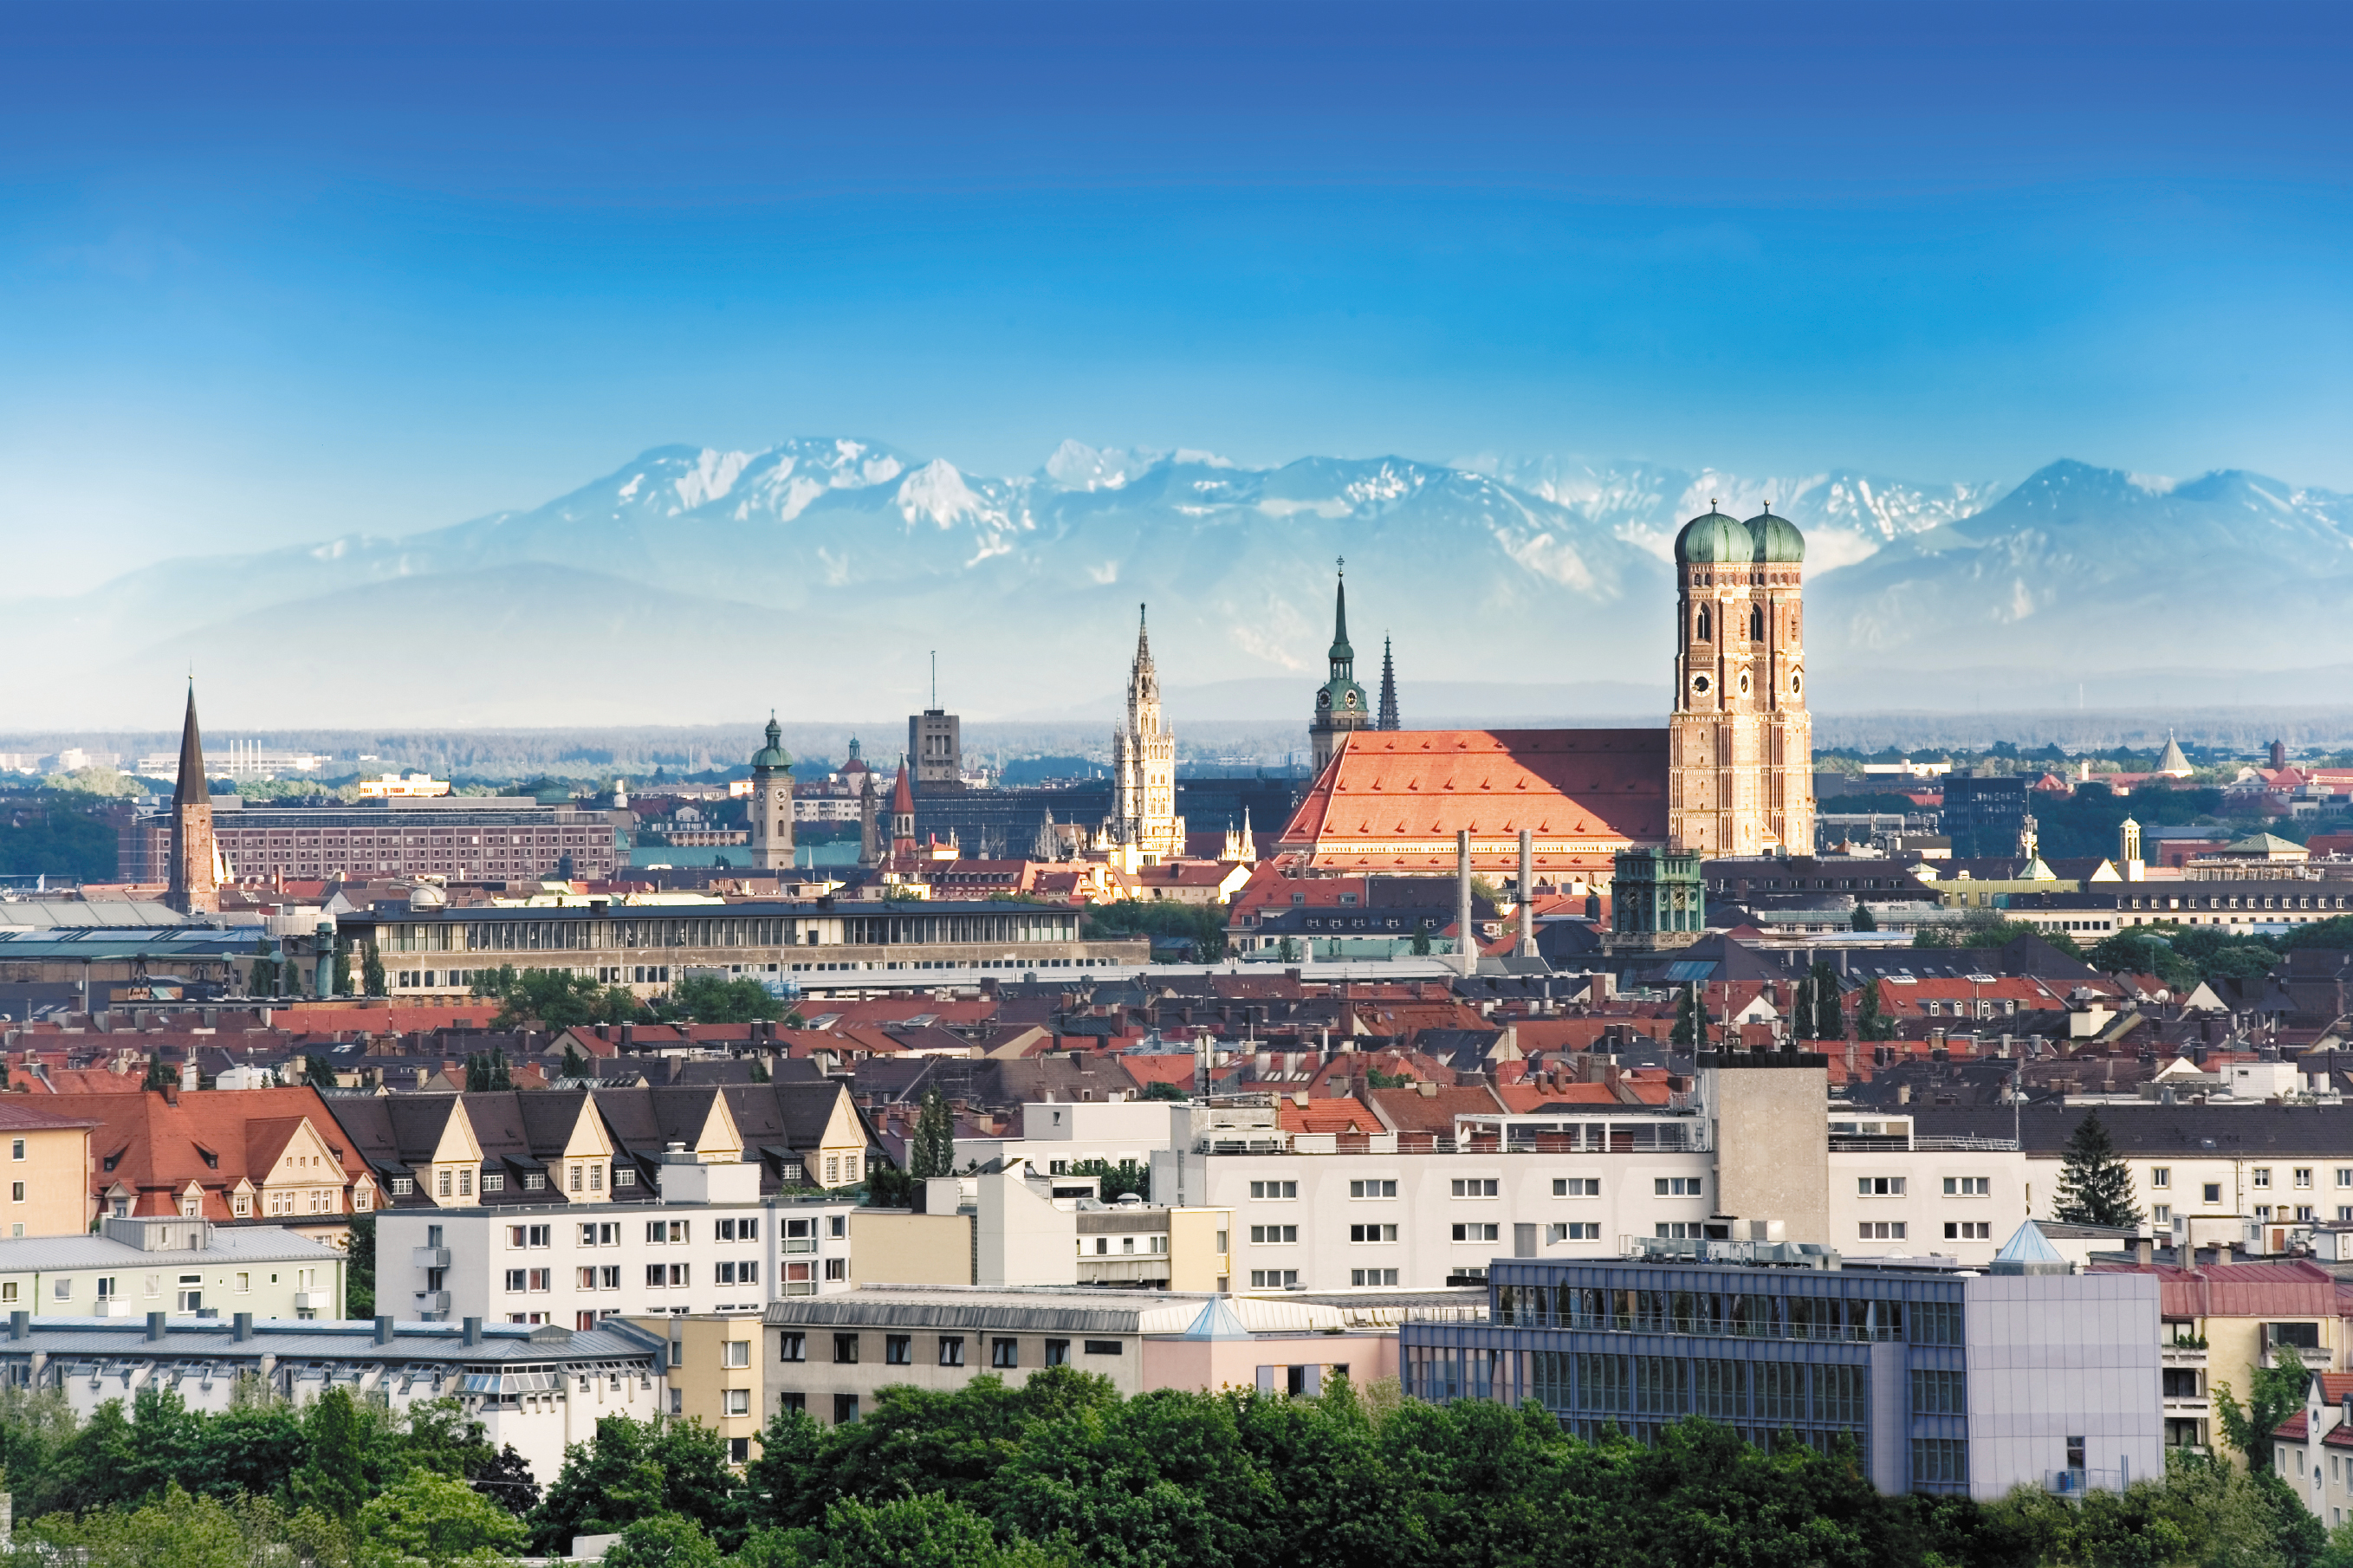 Amazing Munich Pictures & Backgrounds